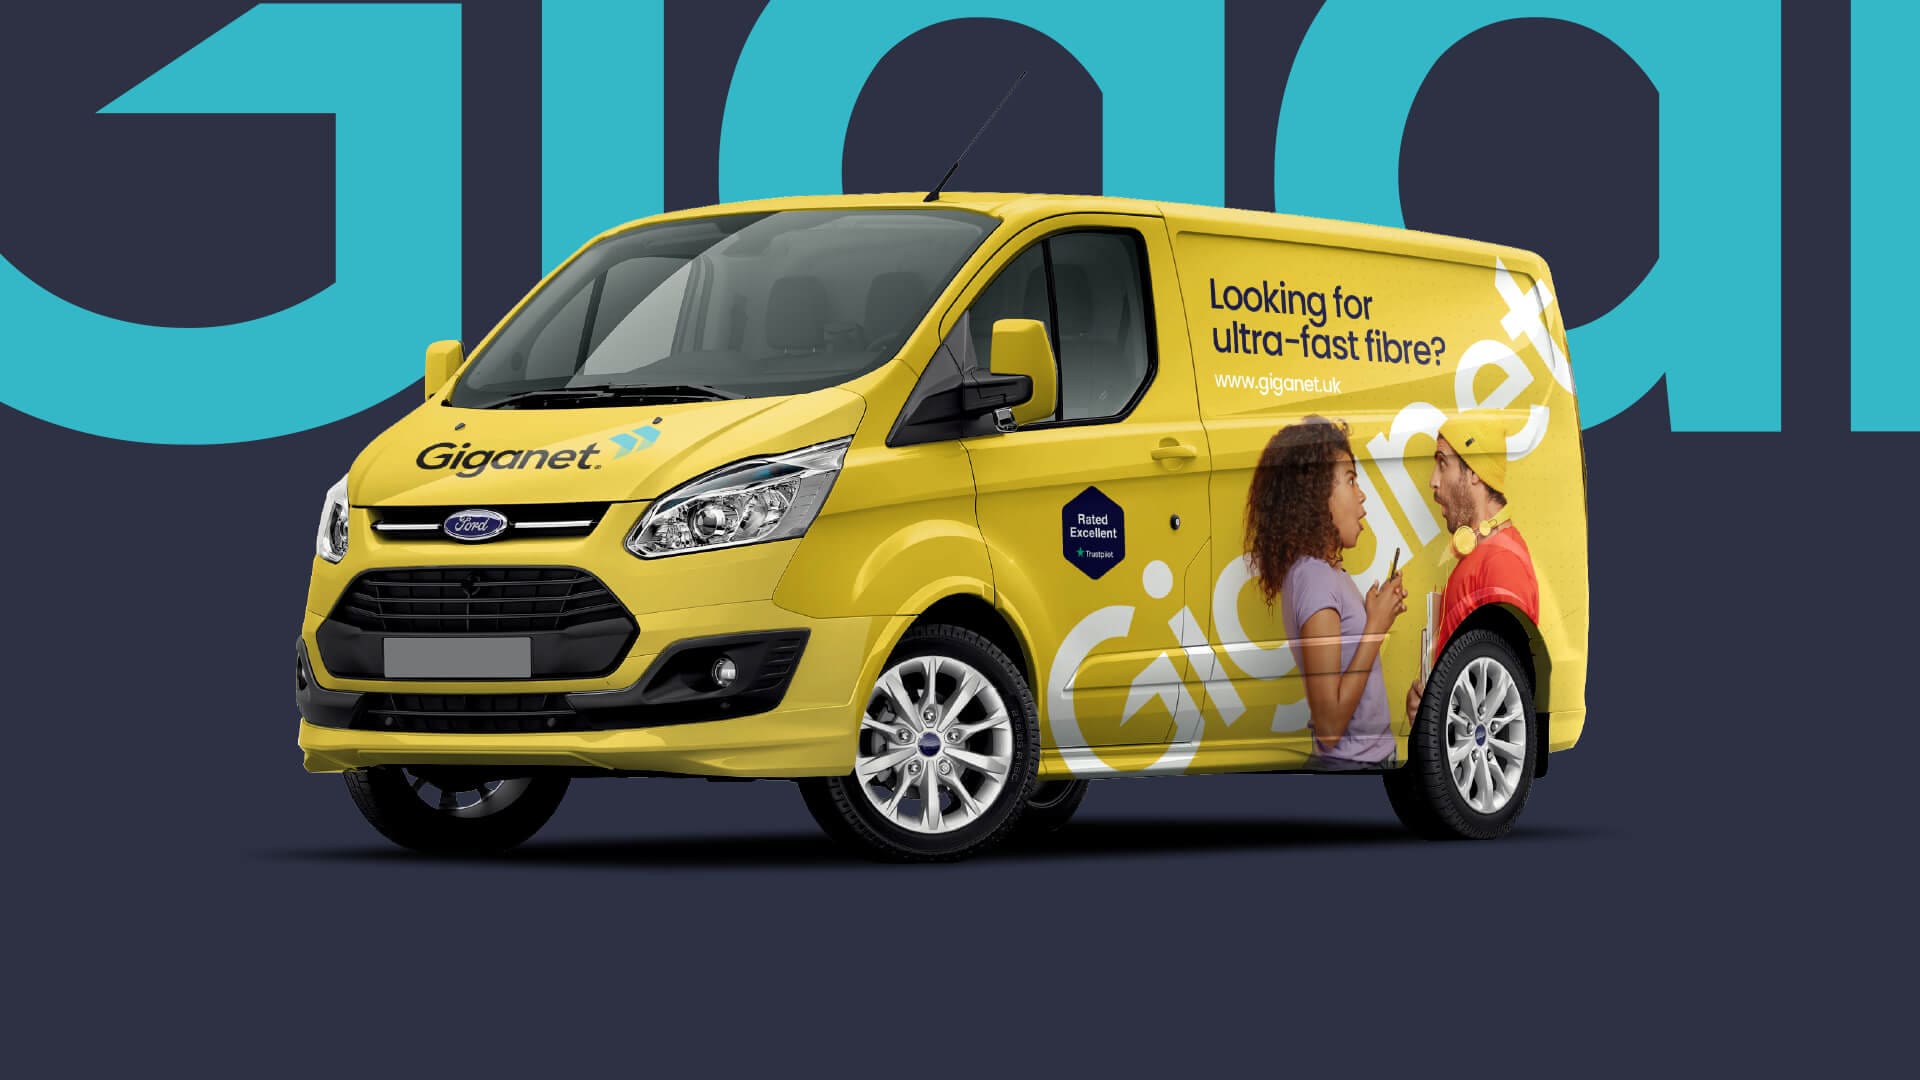 A yellow ford transit van displaying the vehicle, car branding for full fibre provider Giganet